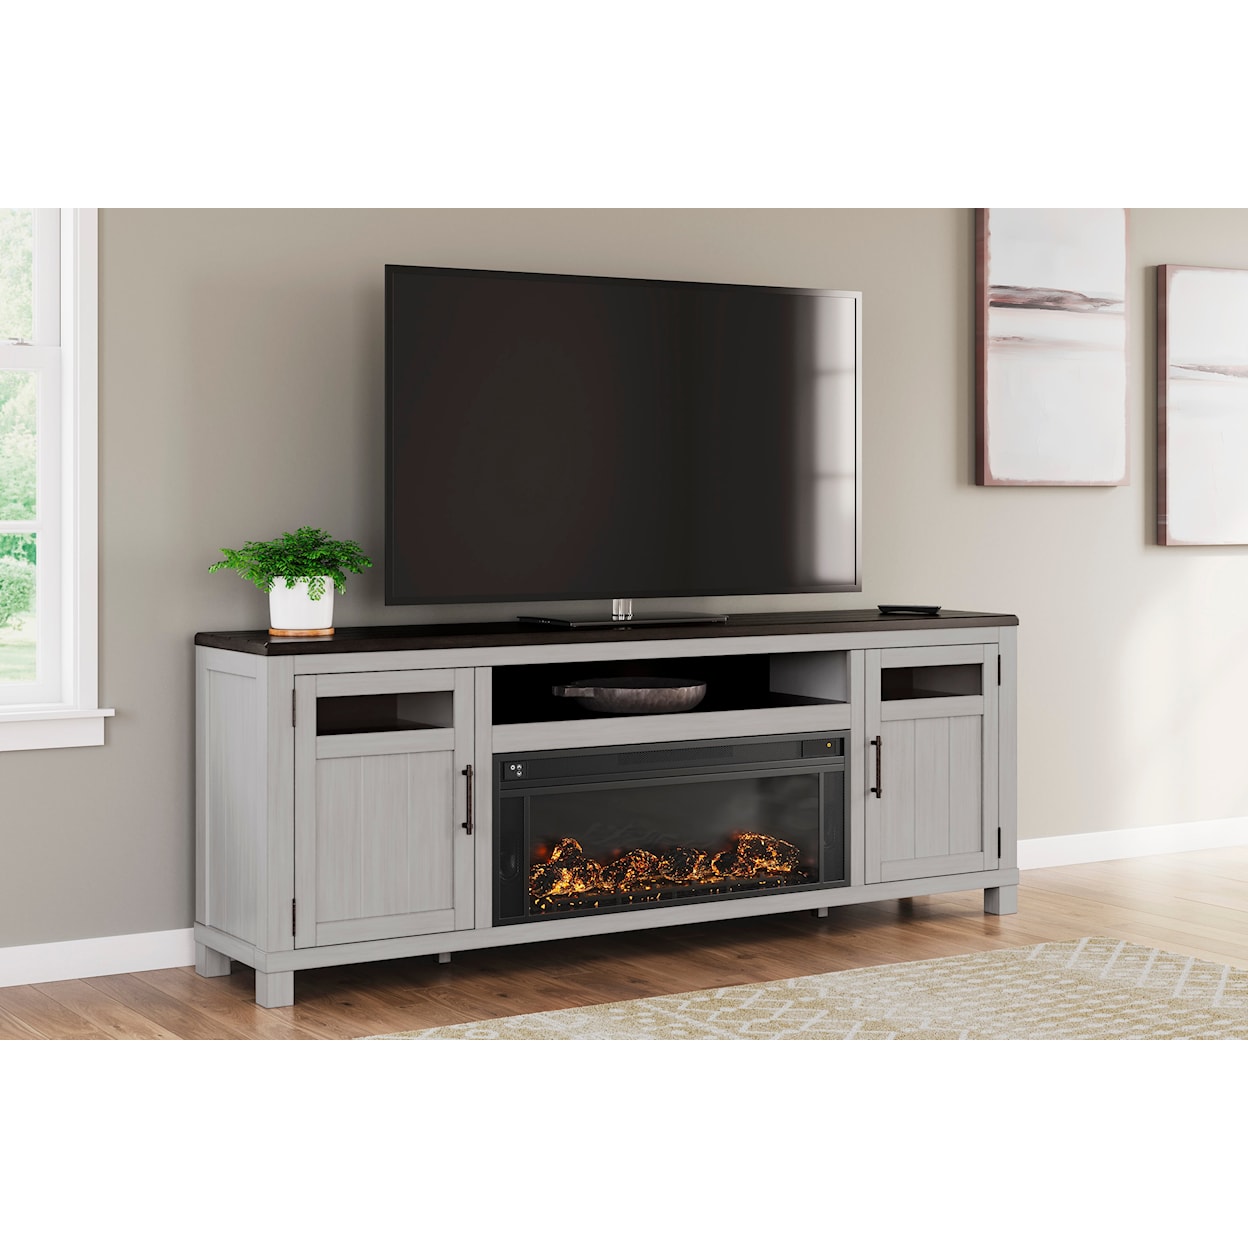 Signature Design by Ashley Darborn 88" TV Stand with Electric Fireplace